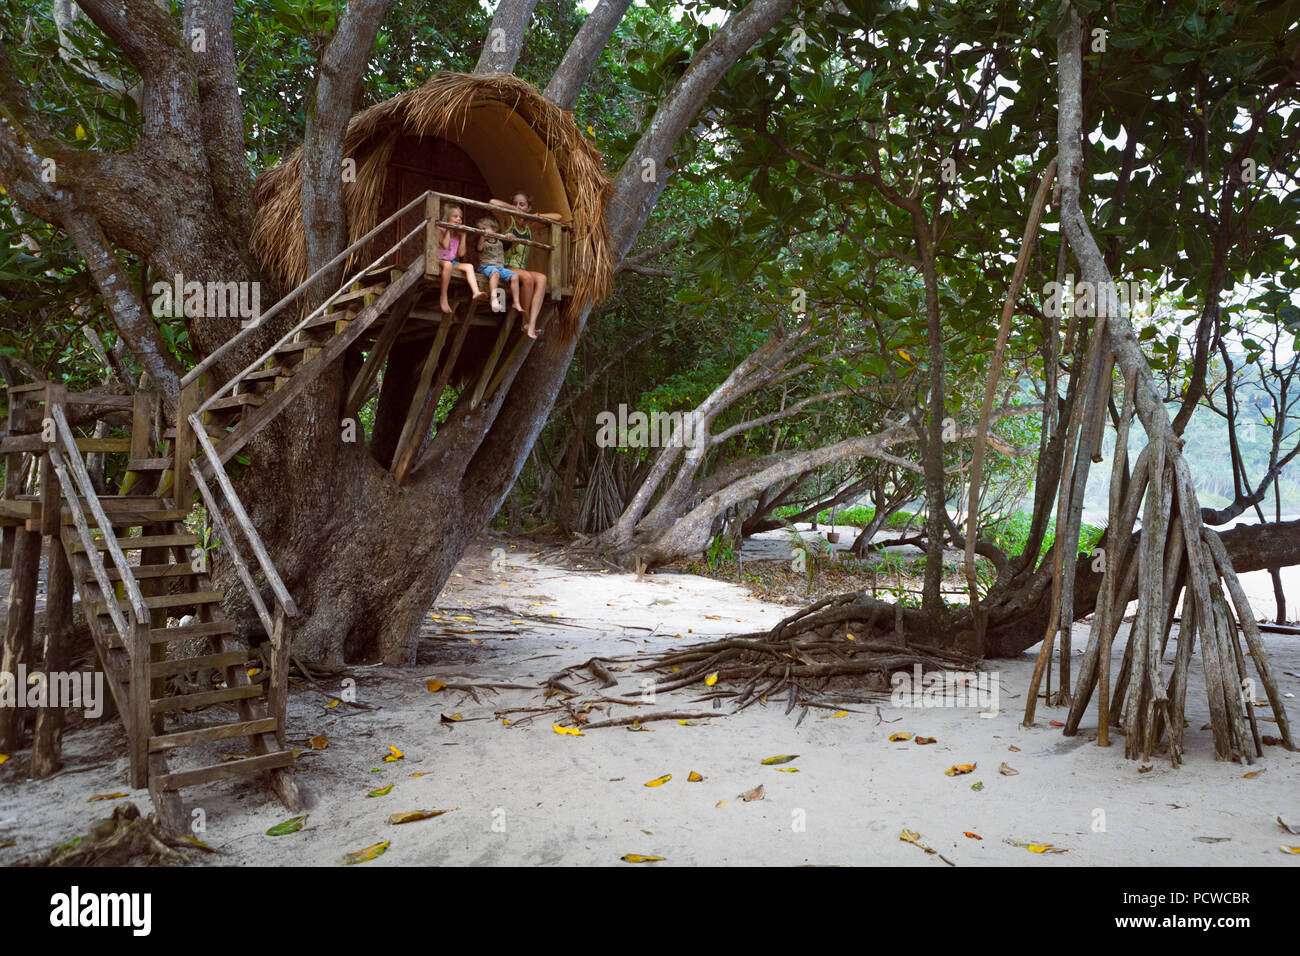 Happy children have fun on family holidays walk. Kids, mother sit on balcony edge of tree house dangling legs, look at sea beach through jungle. Stock Photo